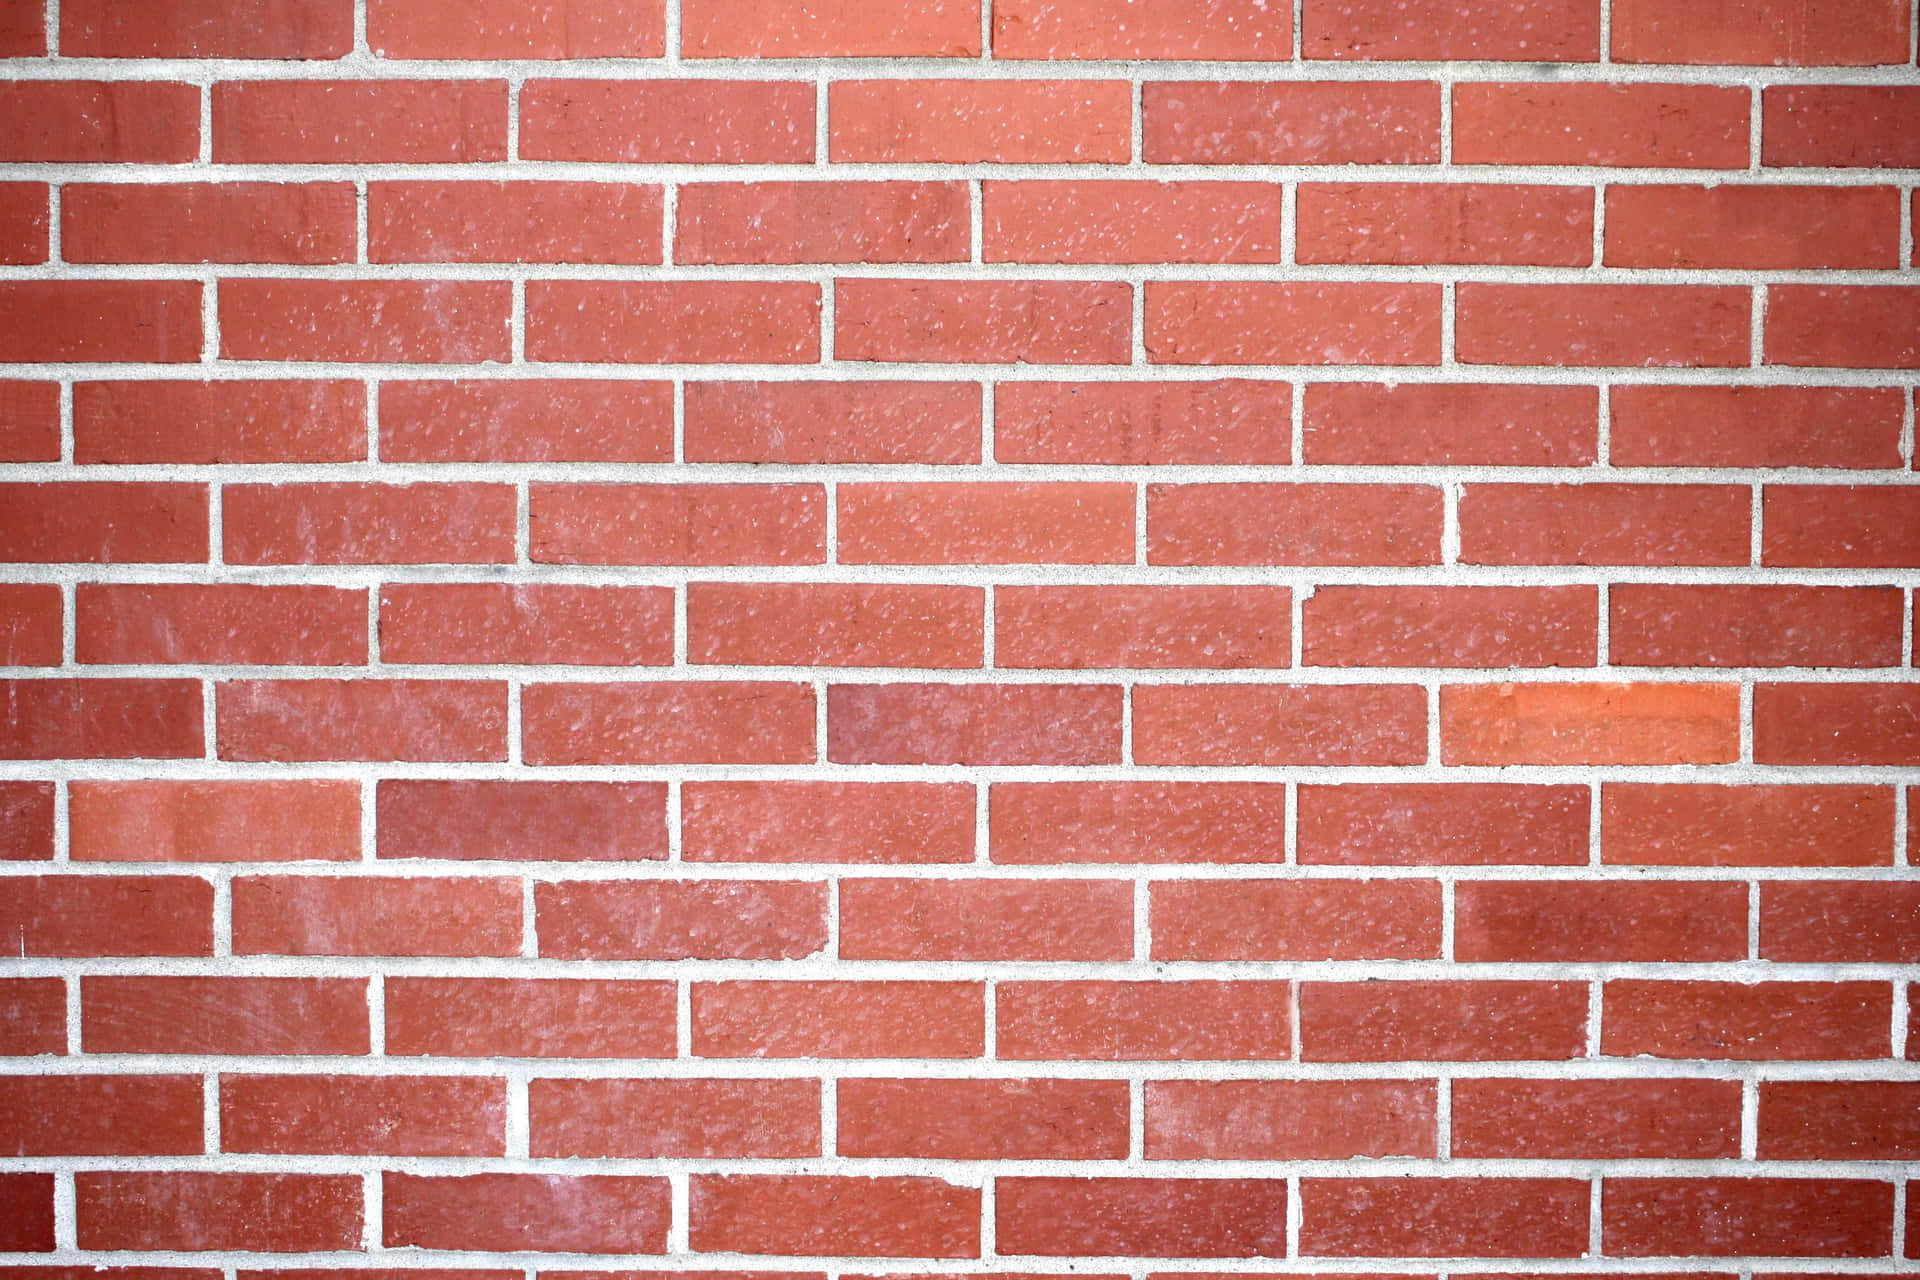 Red brick background with textured surface